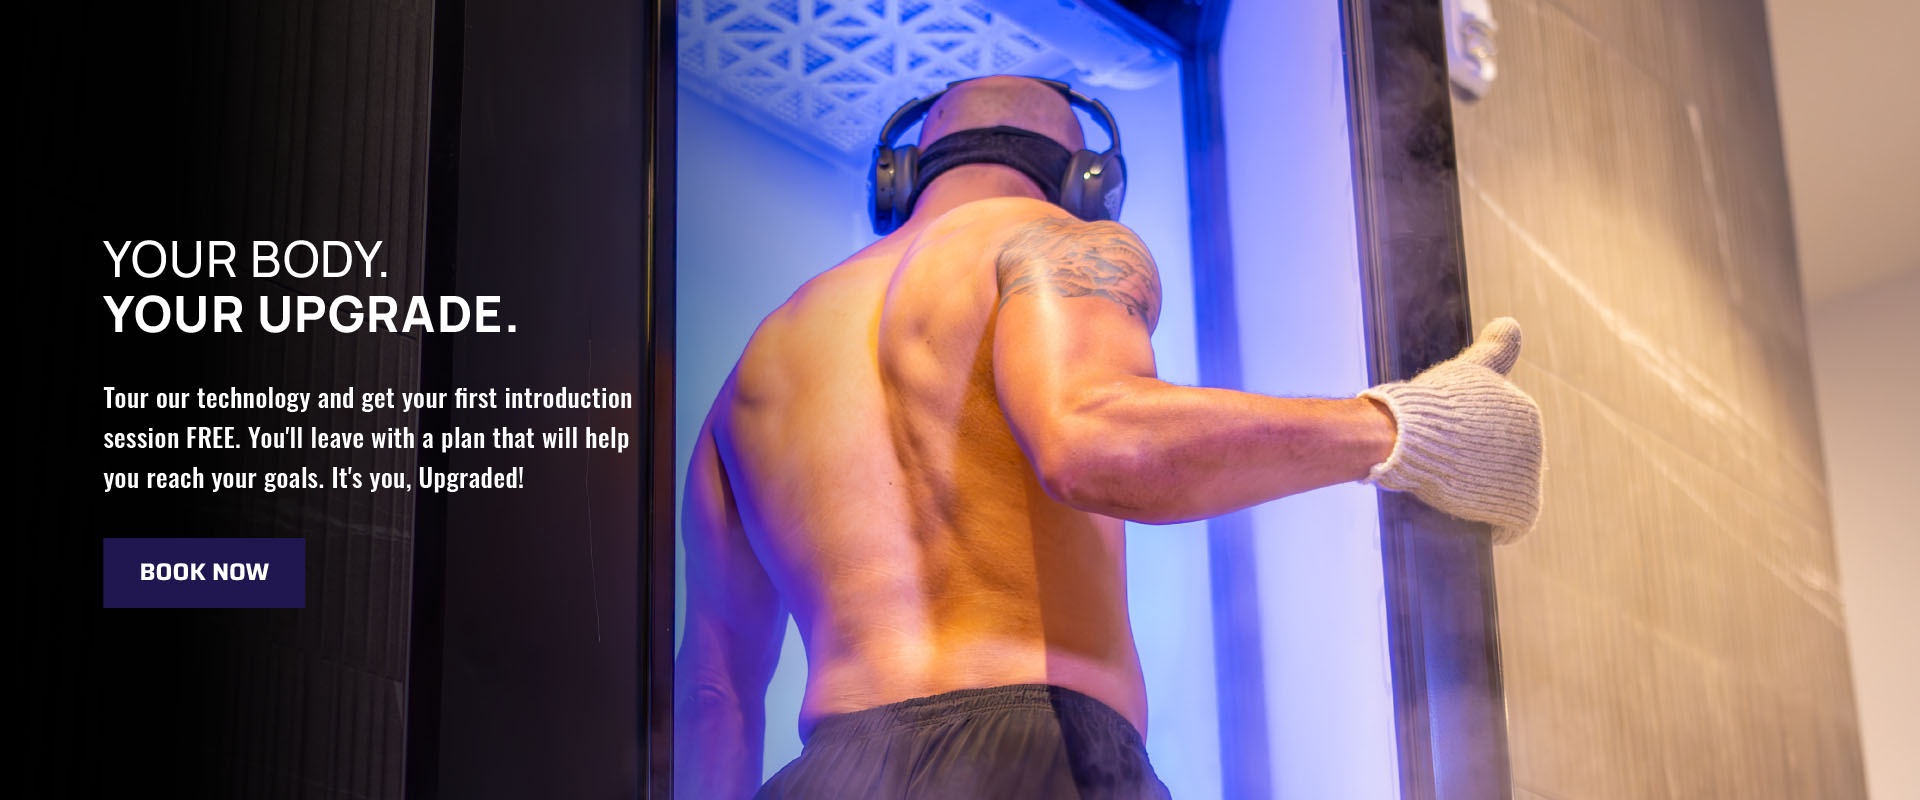 banner showing man entering Cryotherapy booth